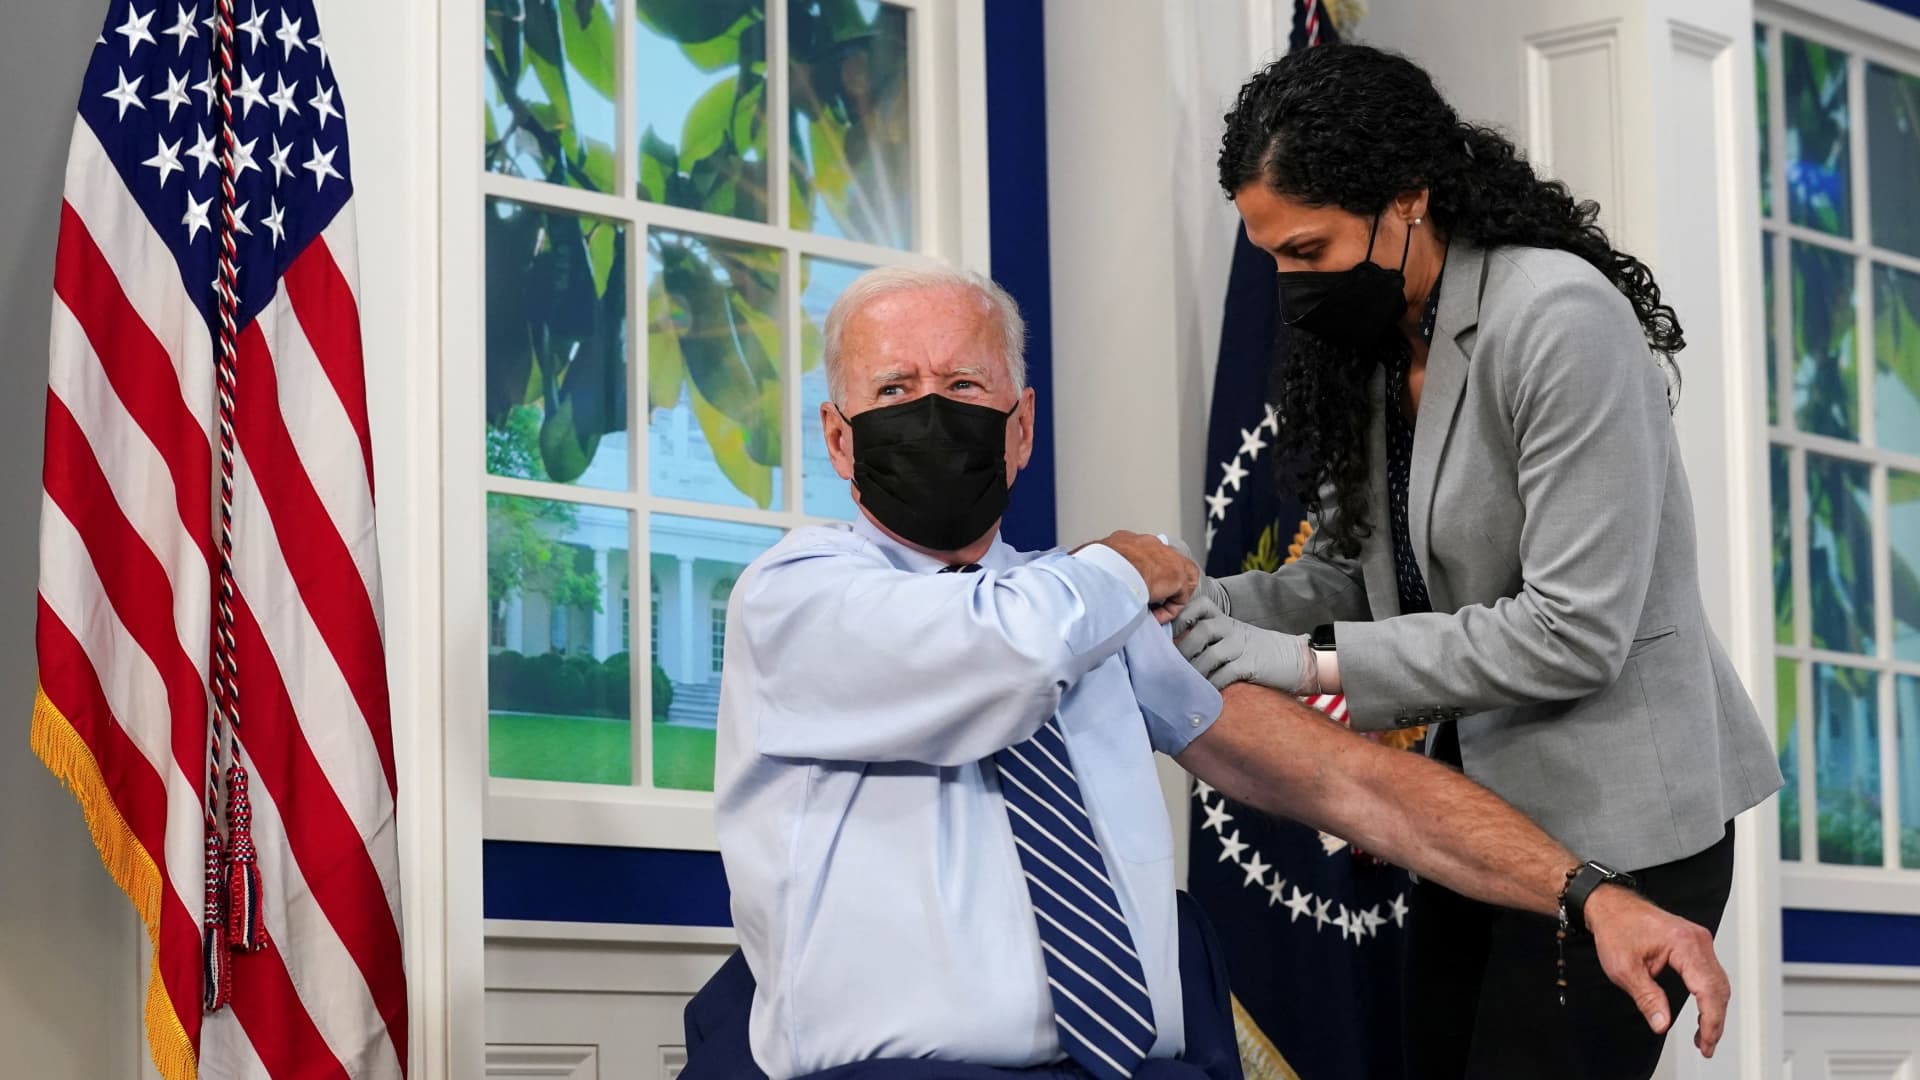 U.S. President Joe Biden holds up his sleeve to receive his coronavirus disease (COVID-19) booster vaccination in the Eisenhower Executive Office Building's South Court Auditorium at the White House in Washington, September 27, 2021.